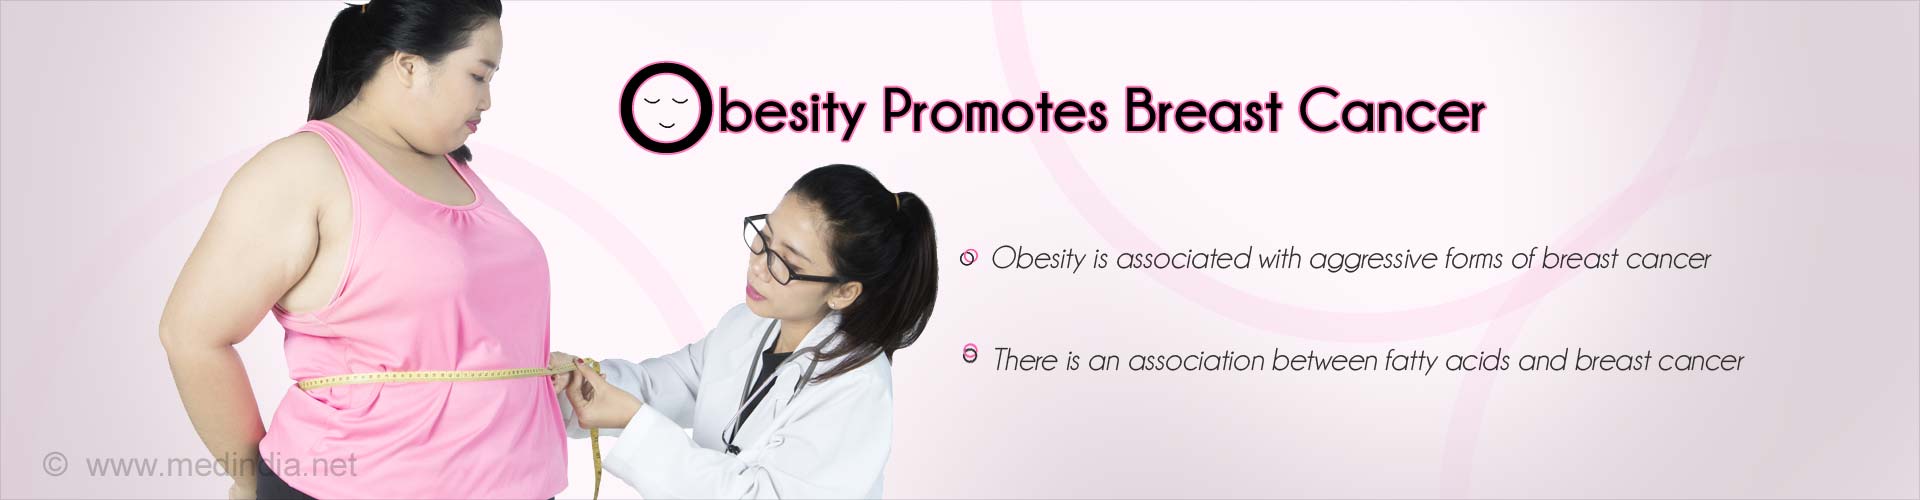 Obesity promotes breast cancer
- Obesity is associated with aggressive forms of breast cancer
- There is an association between fatty acids and breast cancer